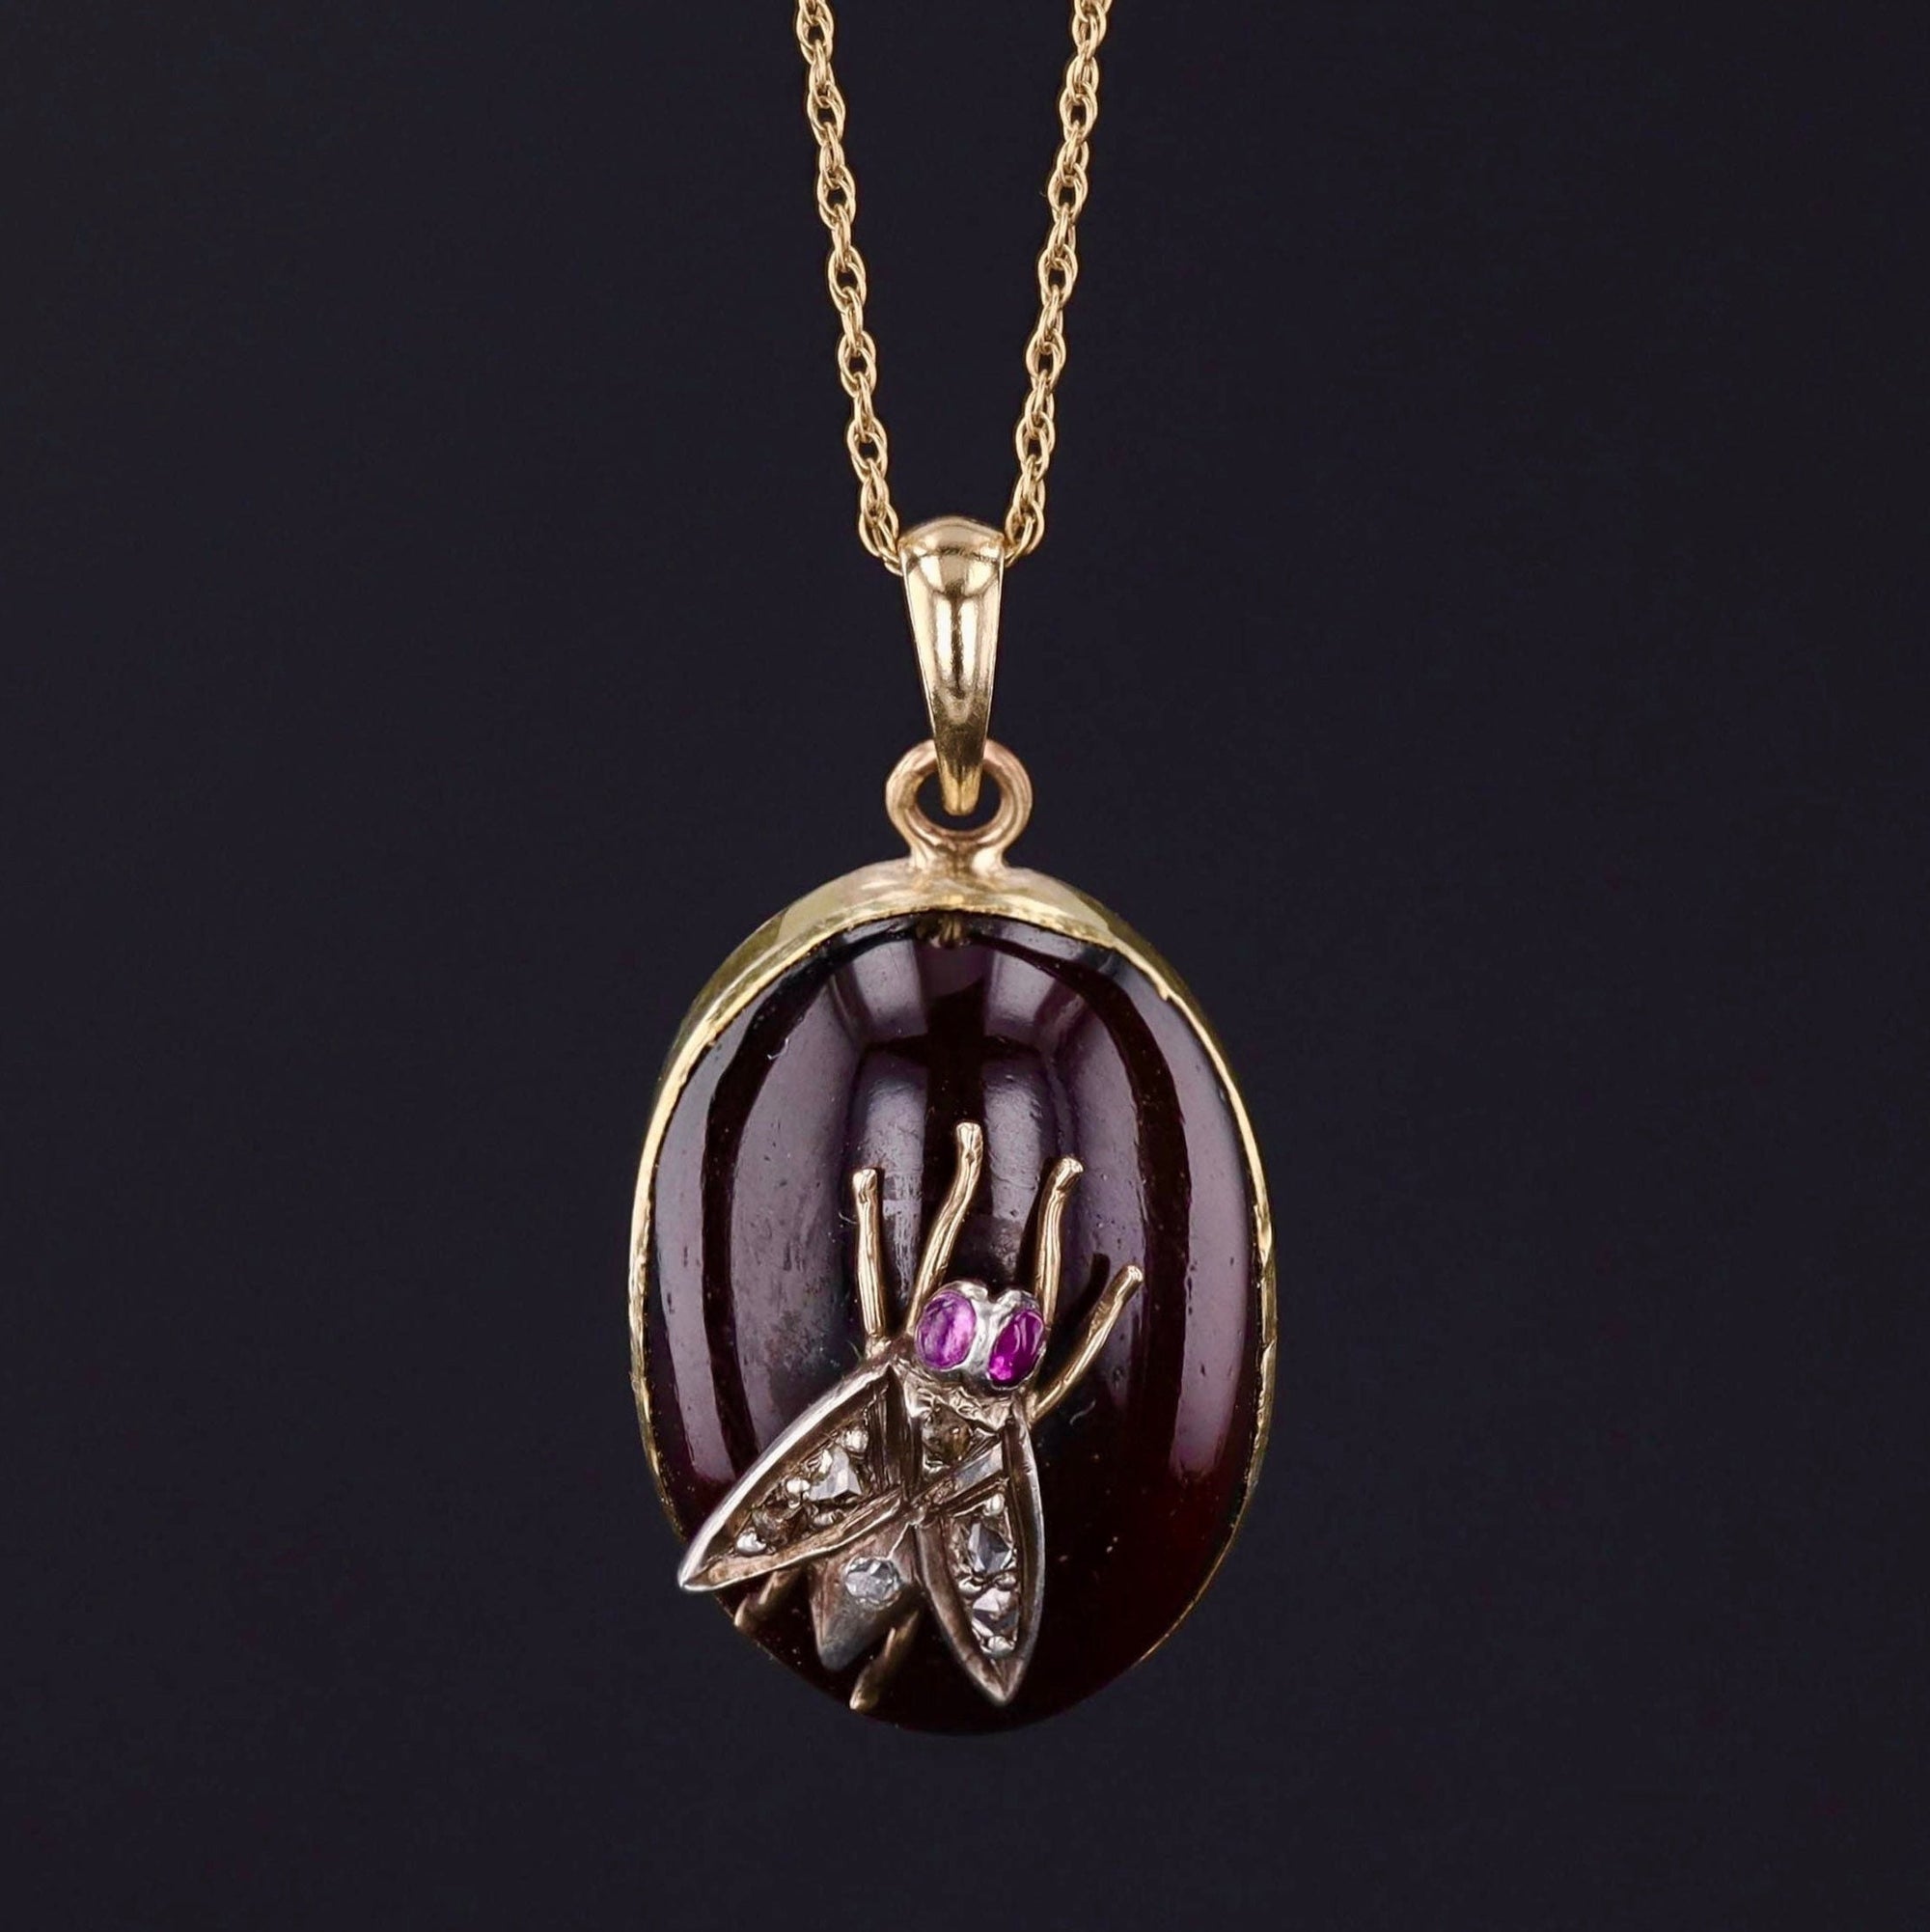 Antique Insect Pendant or Charm | Antique Garnet & Diamond Fly Pendant with Optional 14k Chain 